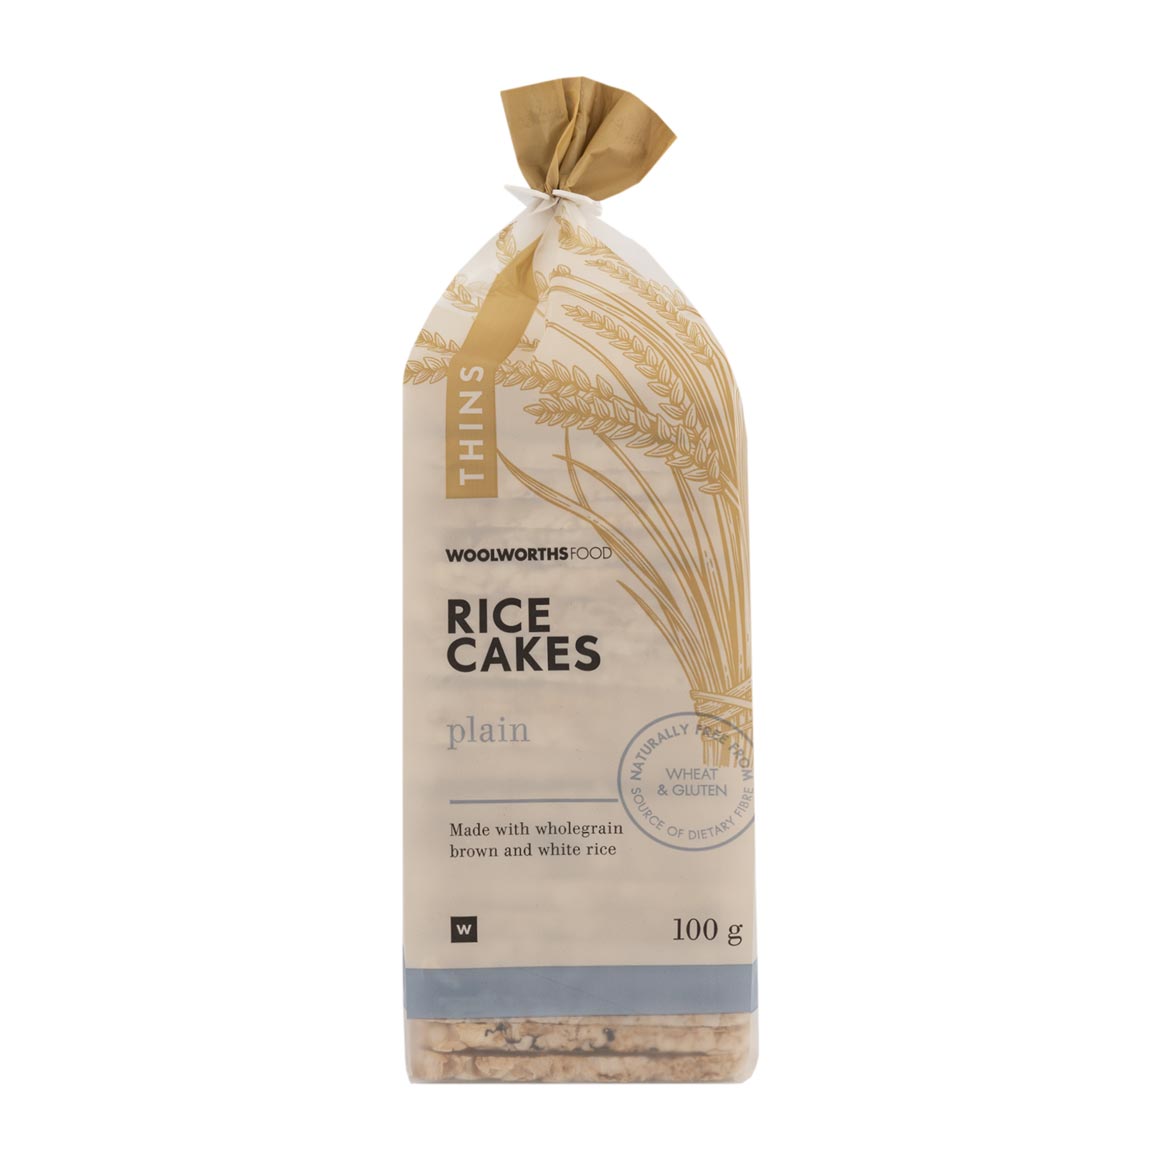 rice cakes woolworths